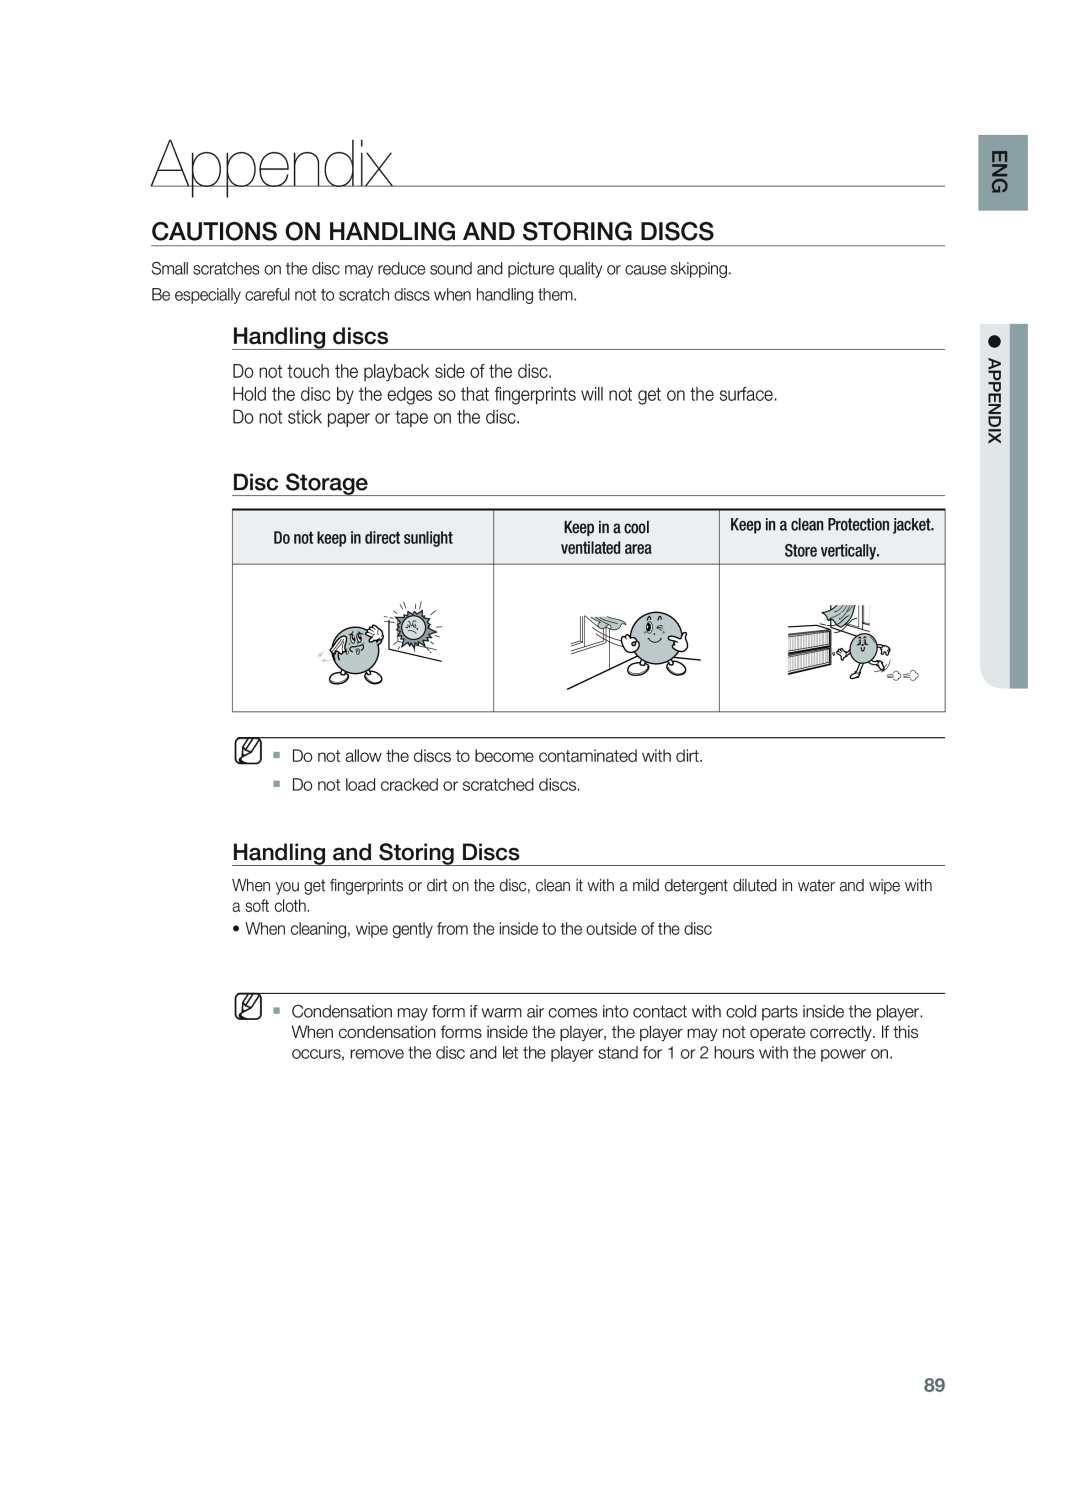 Samsung HT-BD1252, HT-BD1255 user manual Appendix, Cautions On Handling And Storing Discs, Handling discs, Disc Storage 